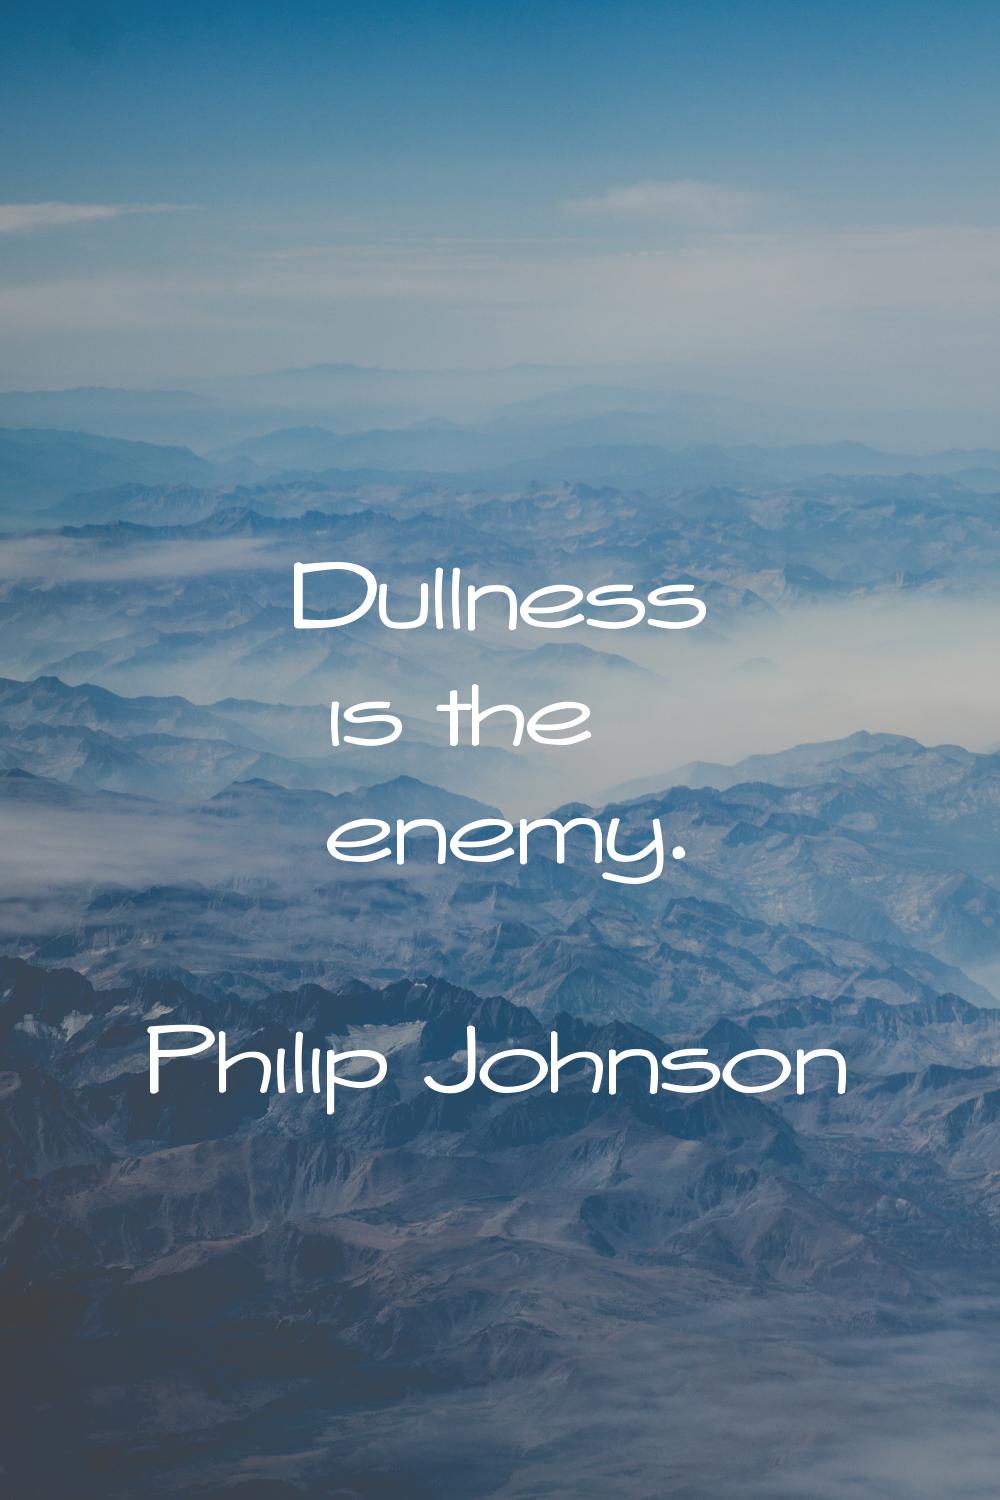 Dullness is the enemy.